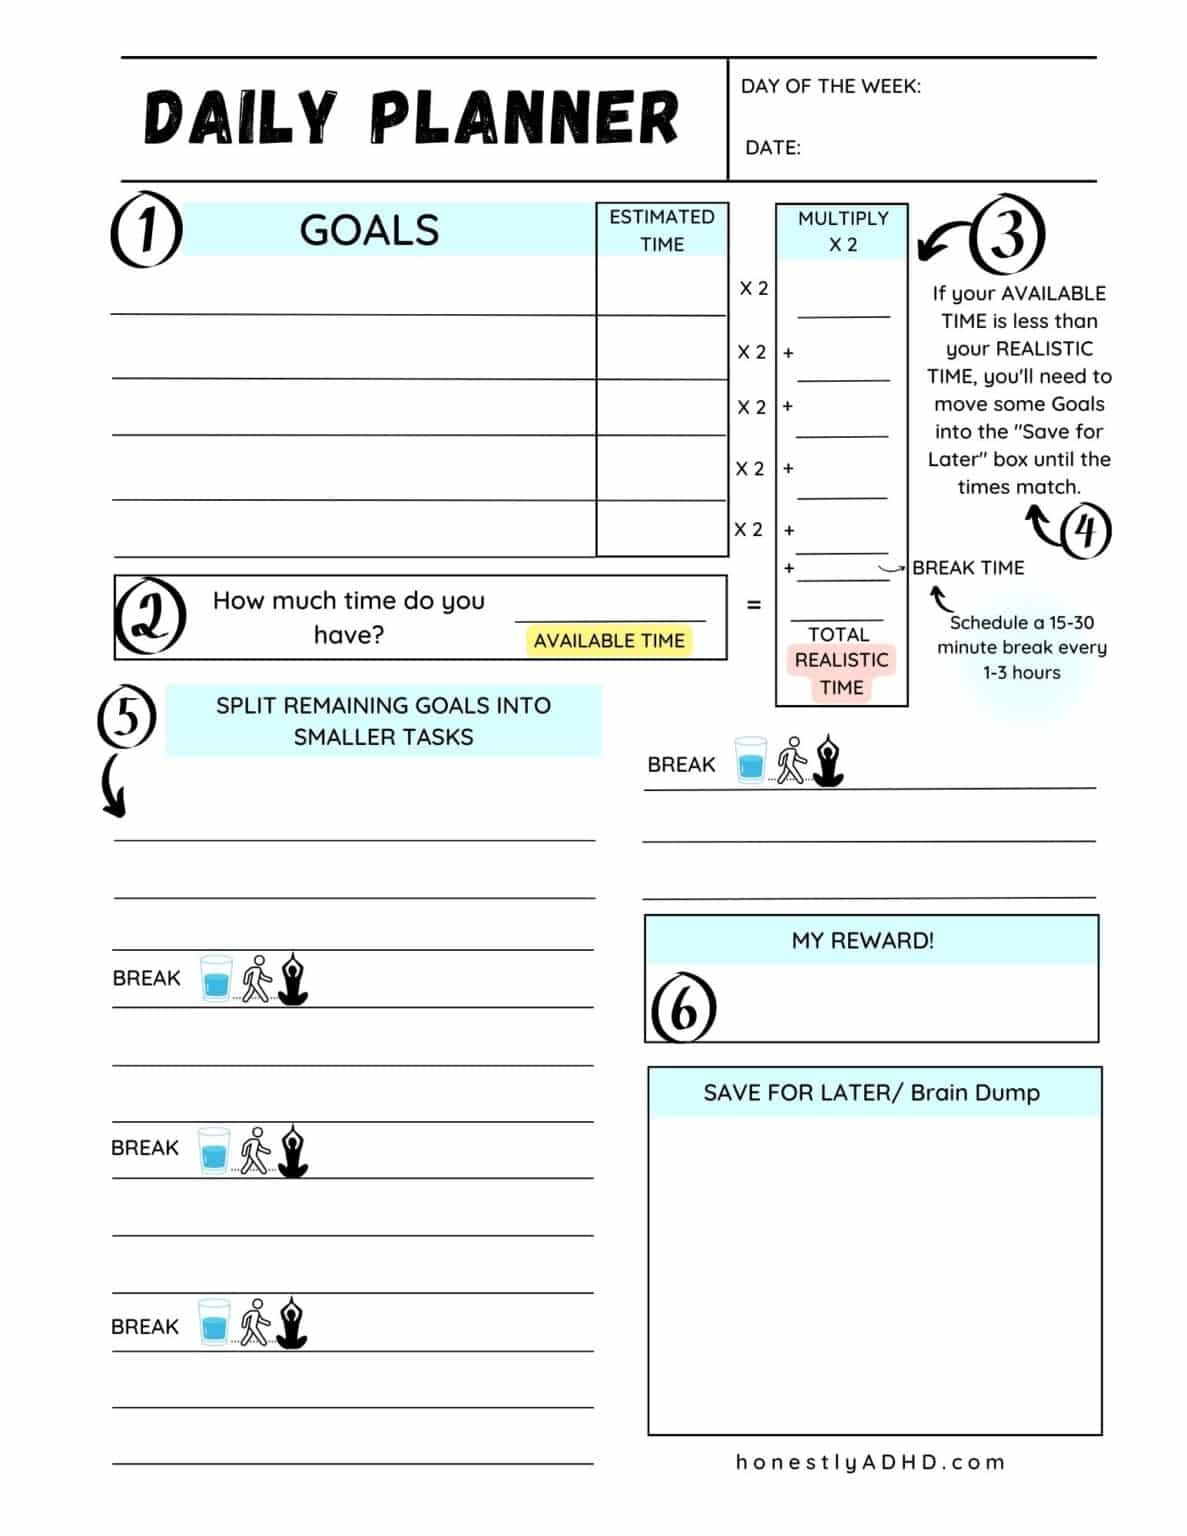 Free Printable ADHD Daily Planner: Achieve Realistic Goals Honestly ADHD